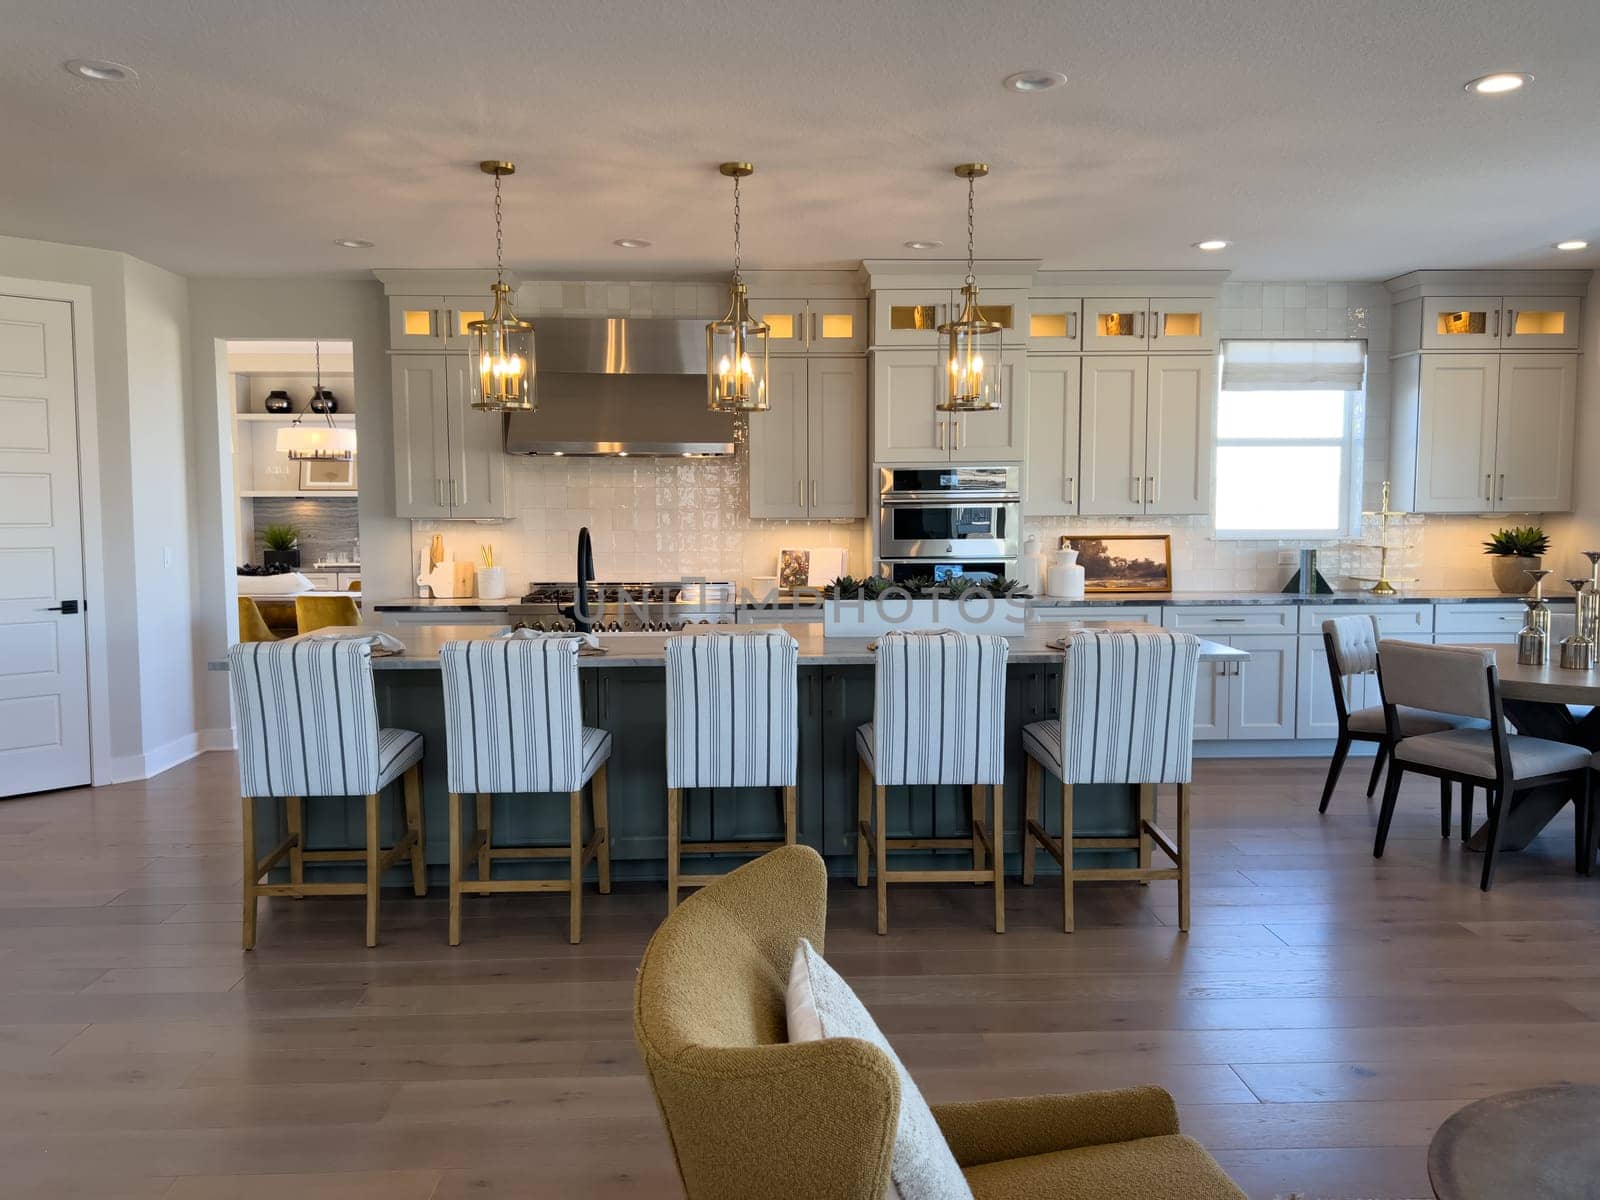 This spacious open-plan kitchen boasts white cabinetry, luxurious gold light fixtures, and a large island with stylish bar seating, ideal for family gatherings and entertaining guests.